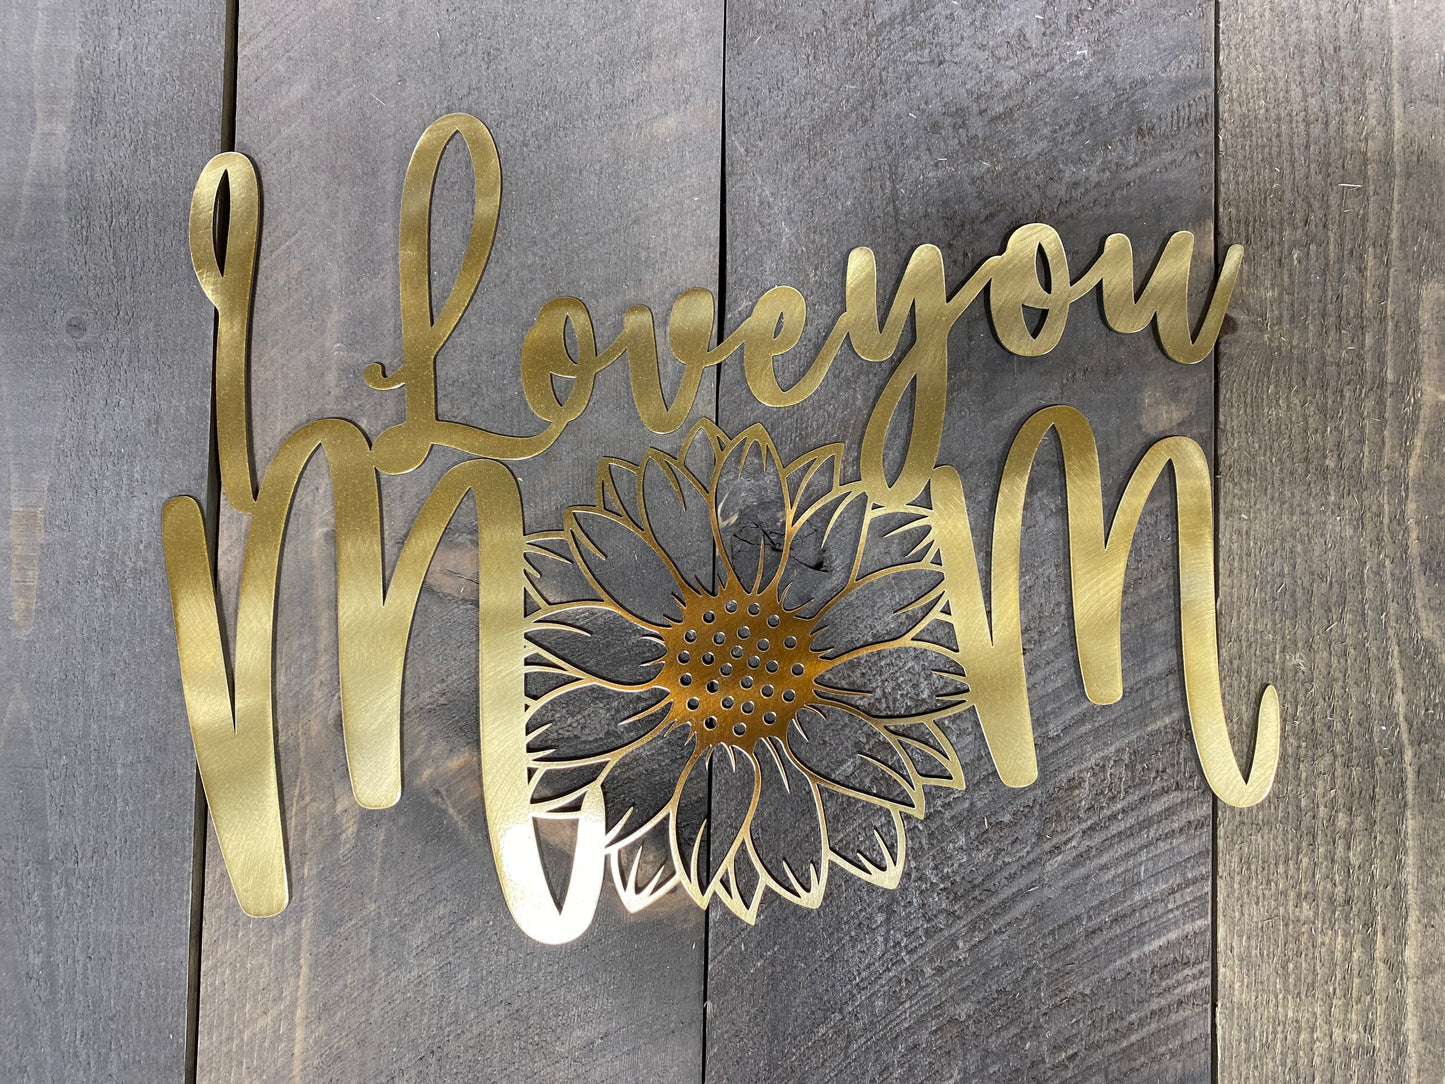 I Love You Mom Sunflower Metal wall art, sunflower home decor, she shed decor, sunflower accent, mom metal wall hanging, gifts for mom